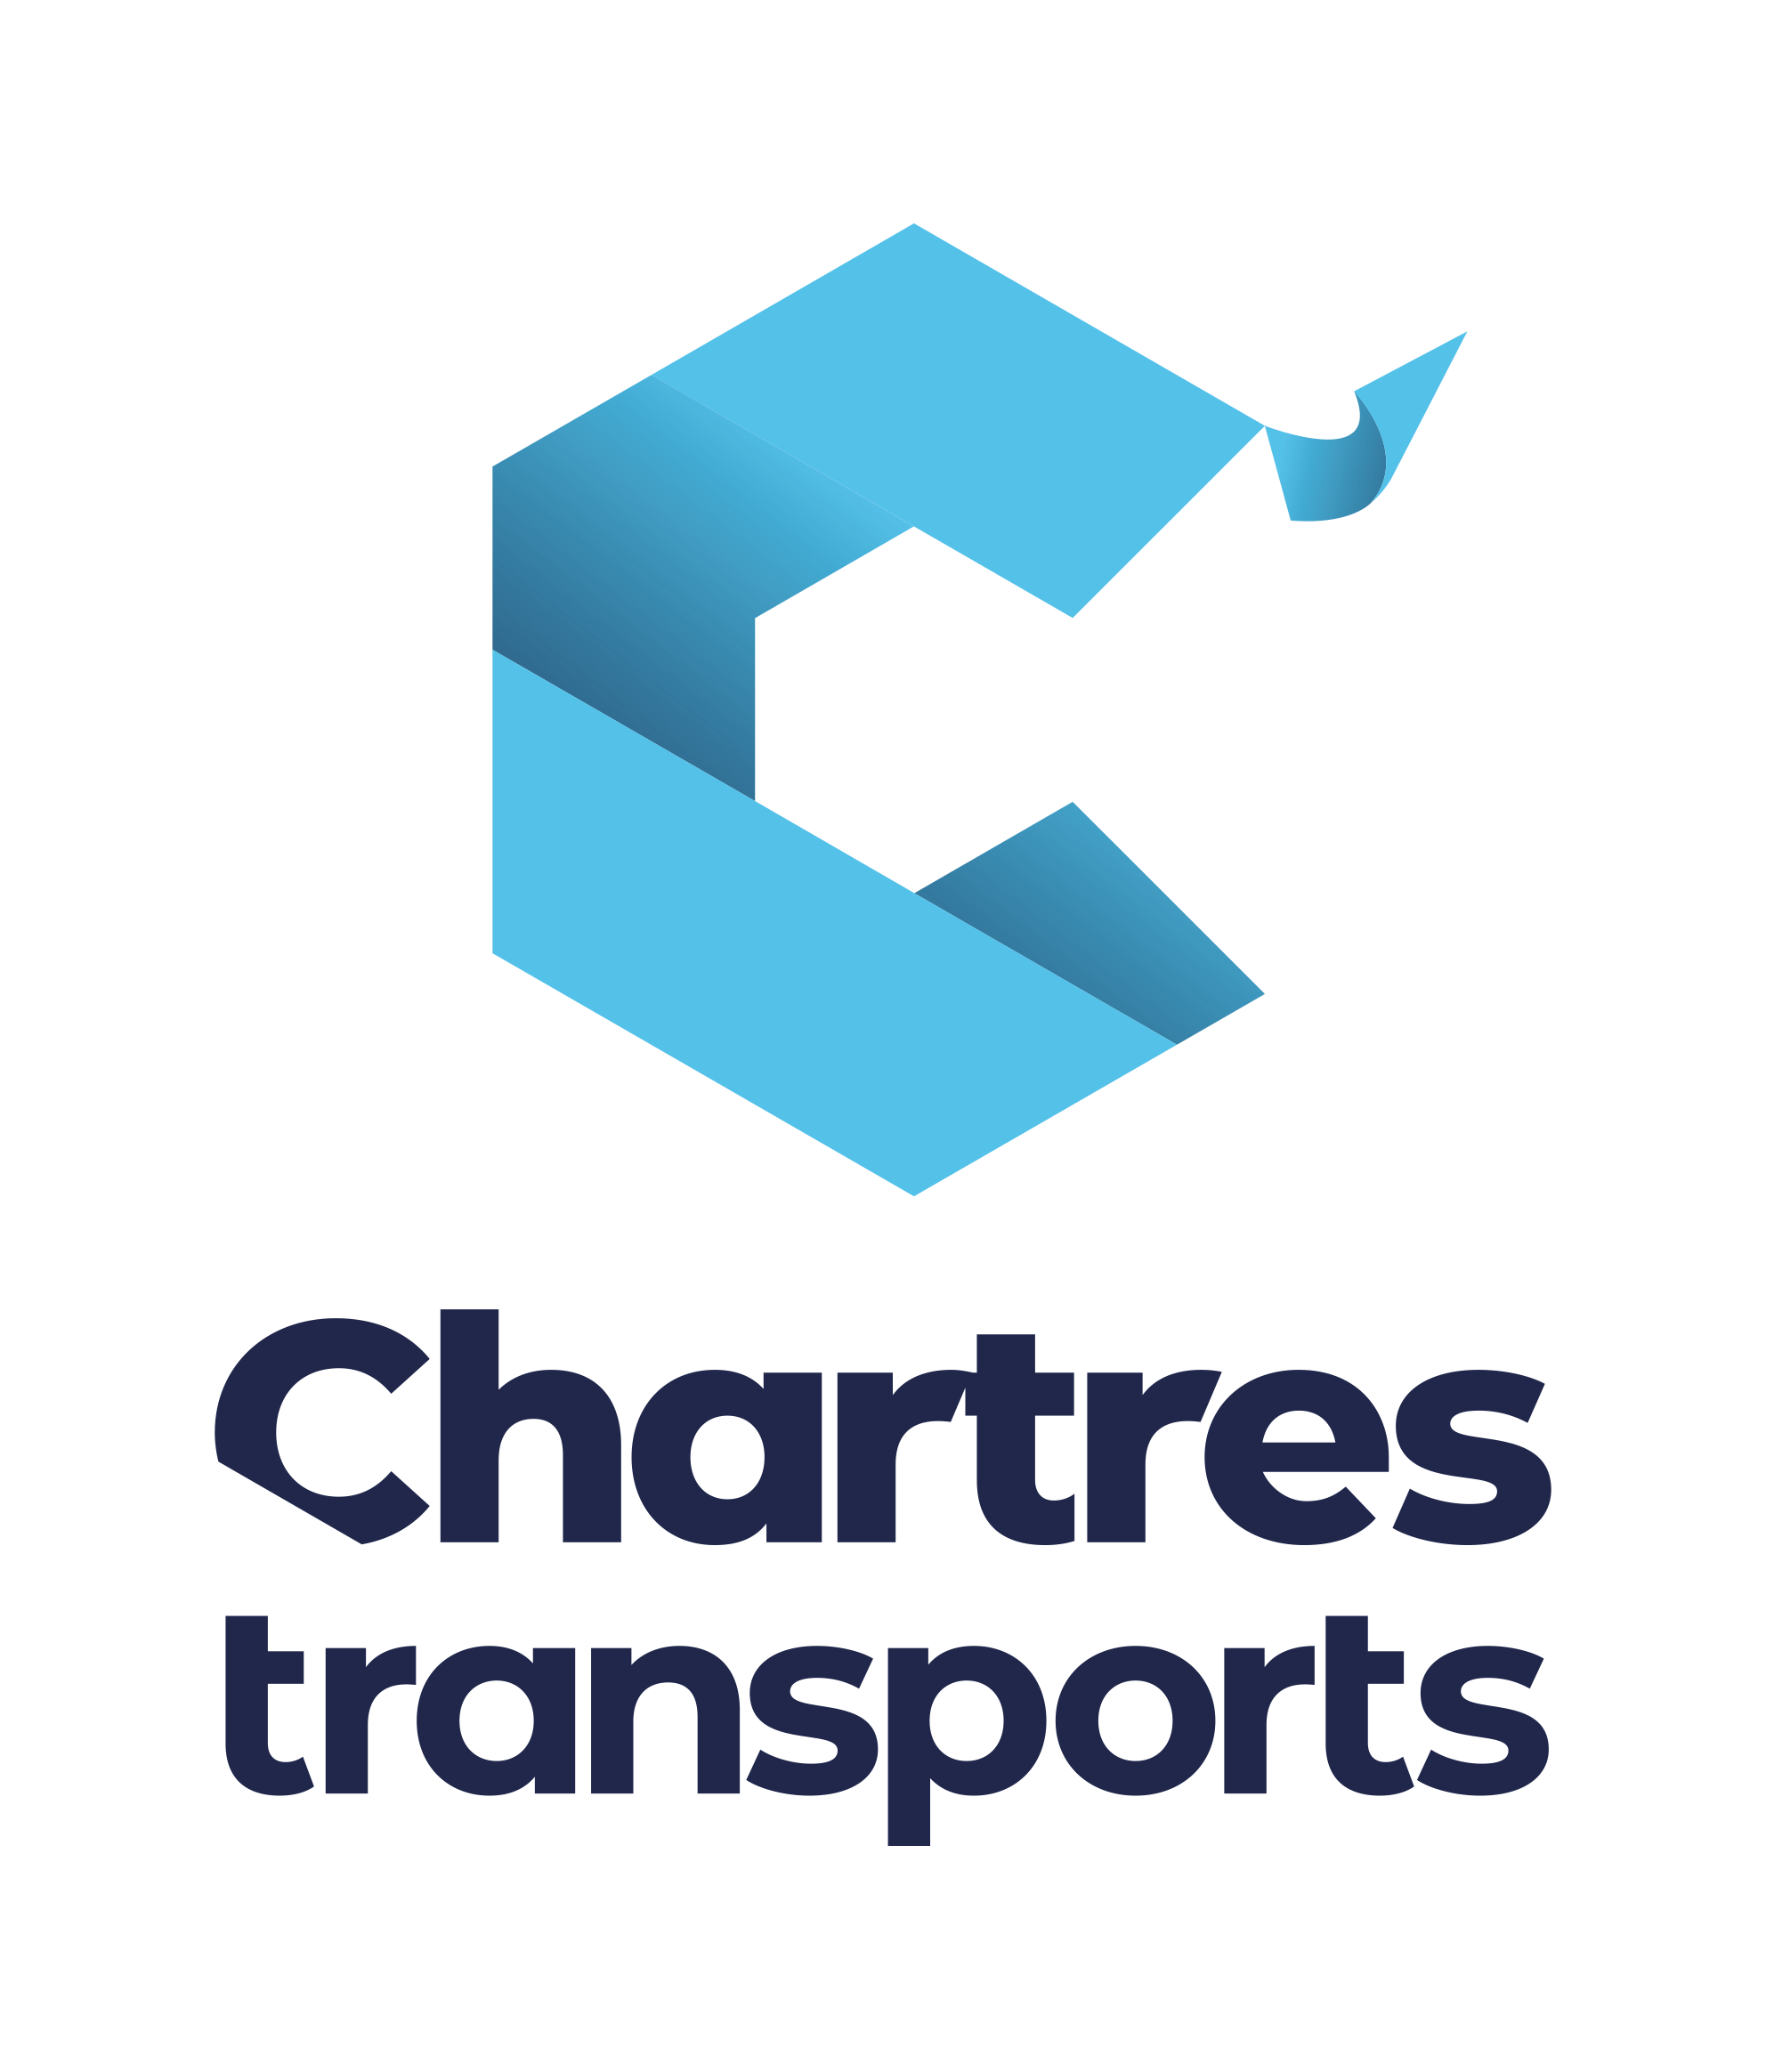 C'Chartres Transports